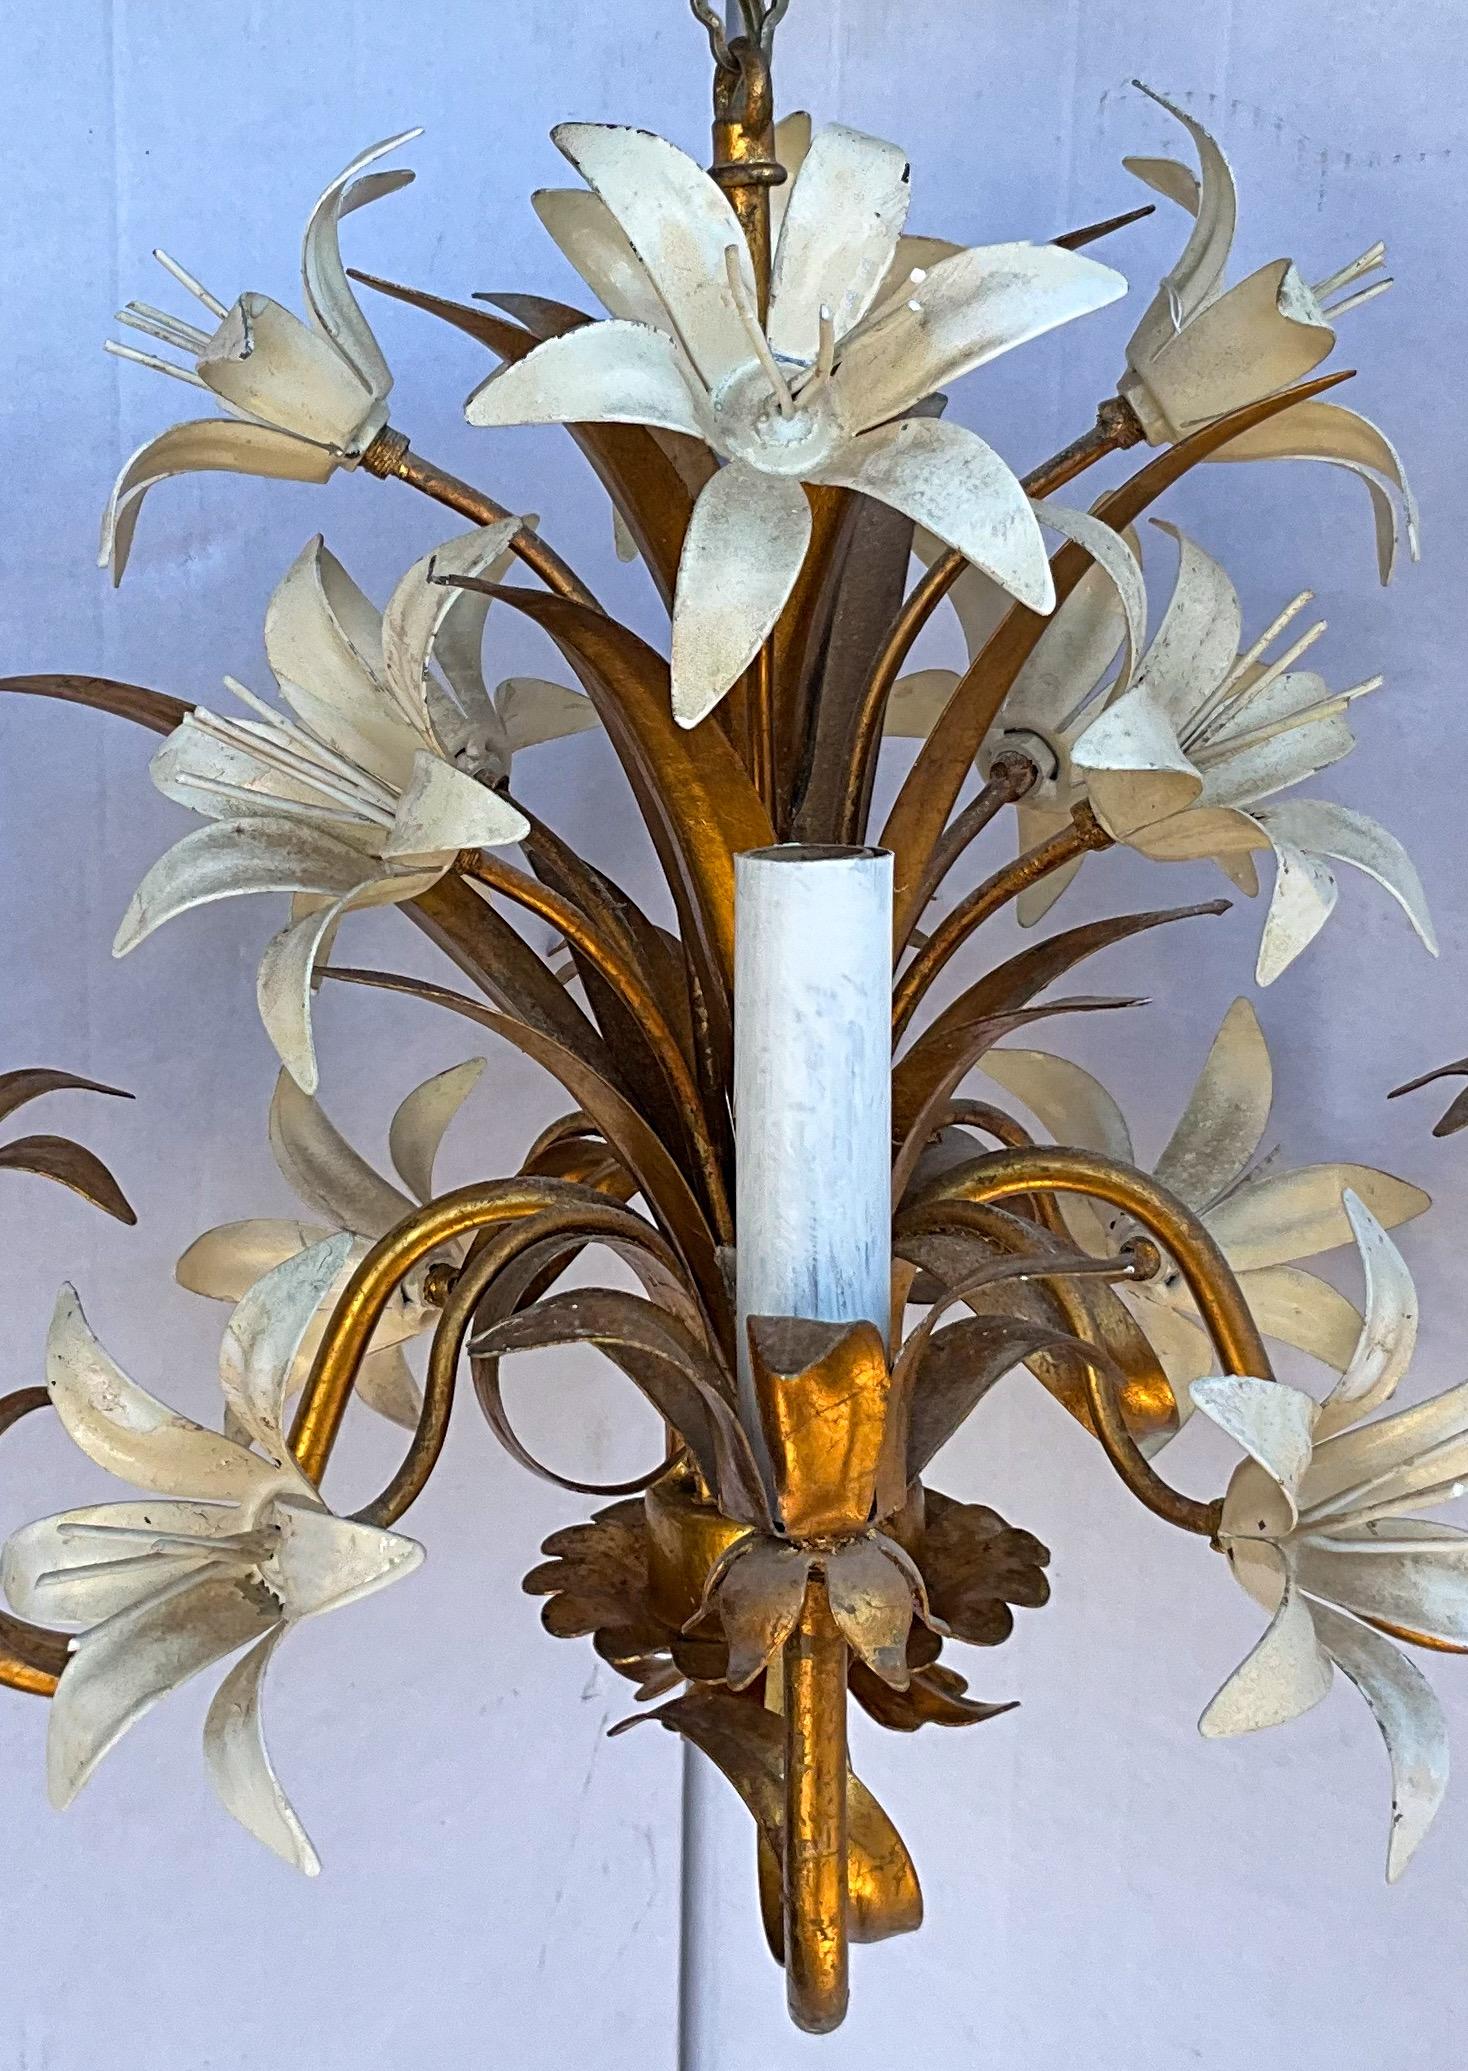 Mid-Century Hollywood Regency Italian Gilt Tole Chandelier With Lilies - 6 Arm In Good Condition For Sale In Kennesaw, GA